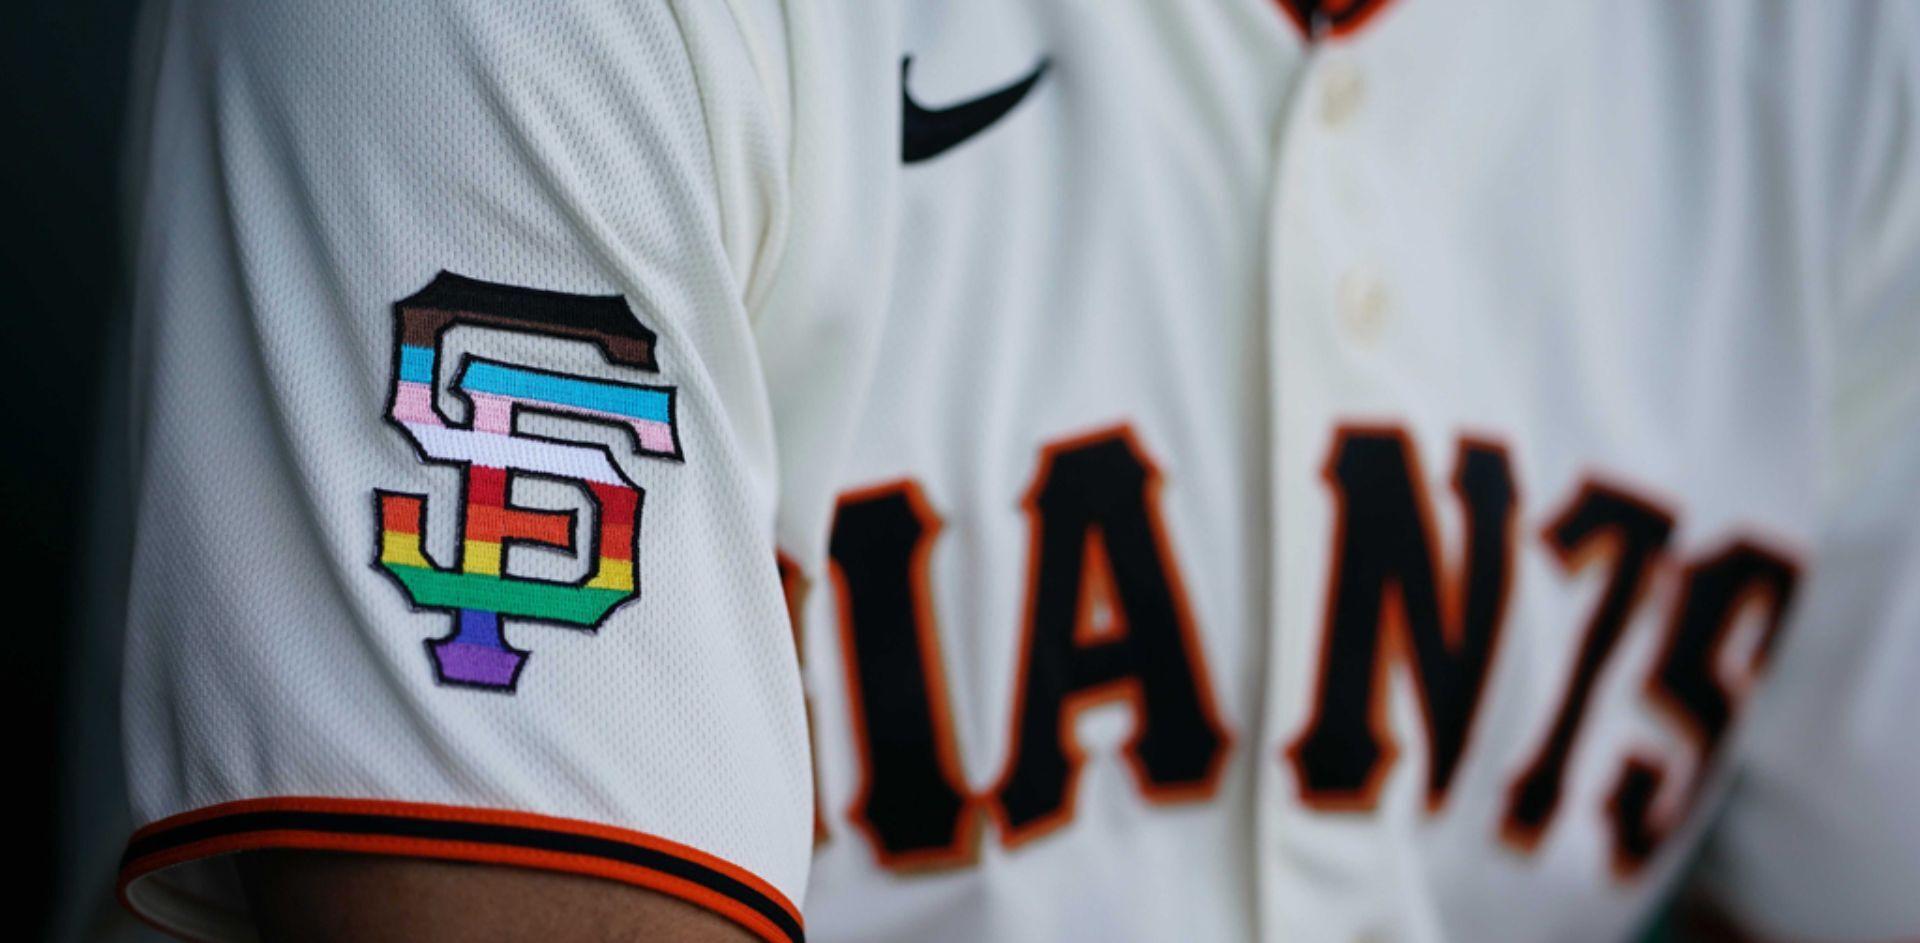 Giants Become First MLB Team To Wear Pride Colors On Field